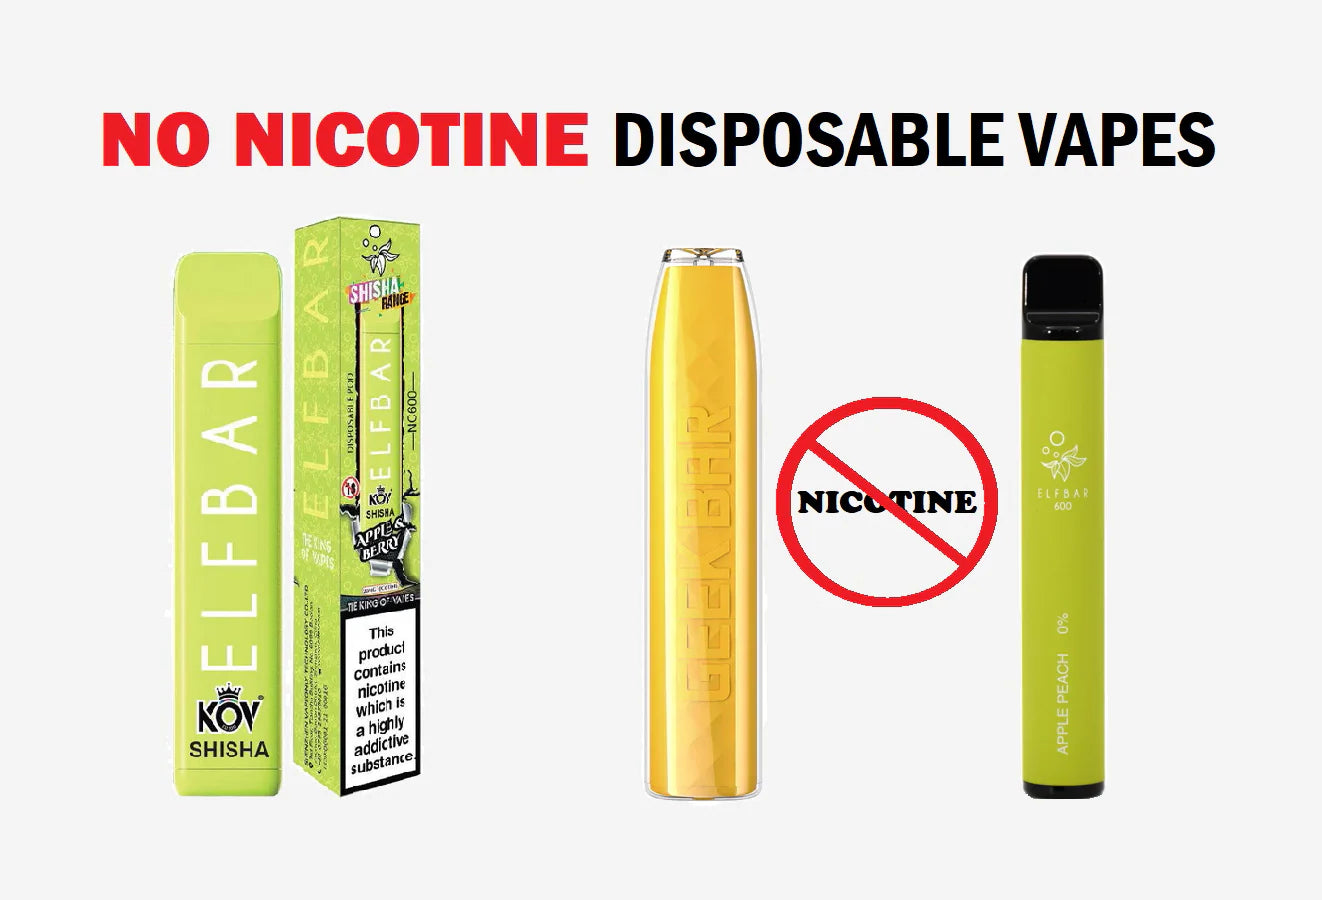 What Are the Best No Nicotine Disposable Vapes?